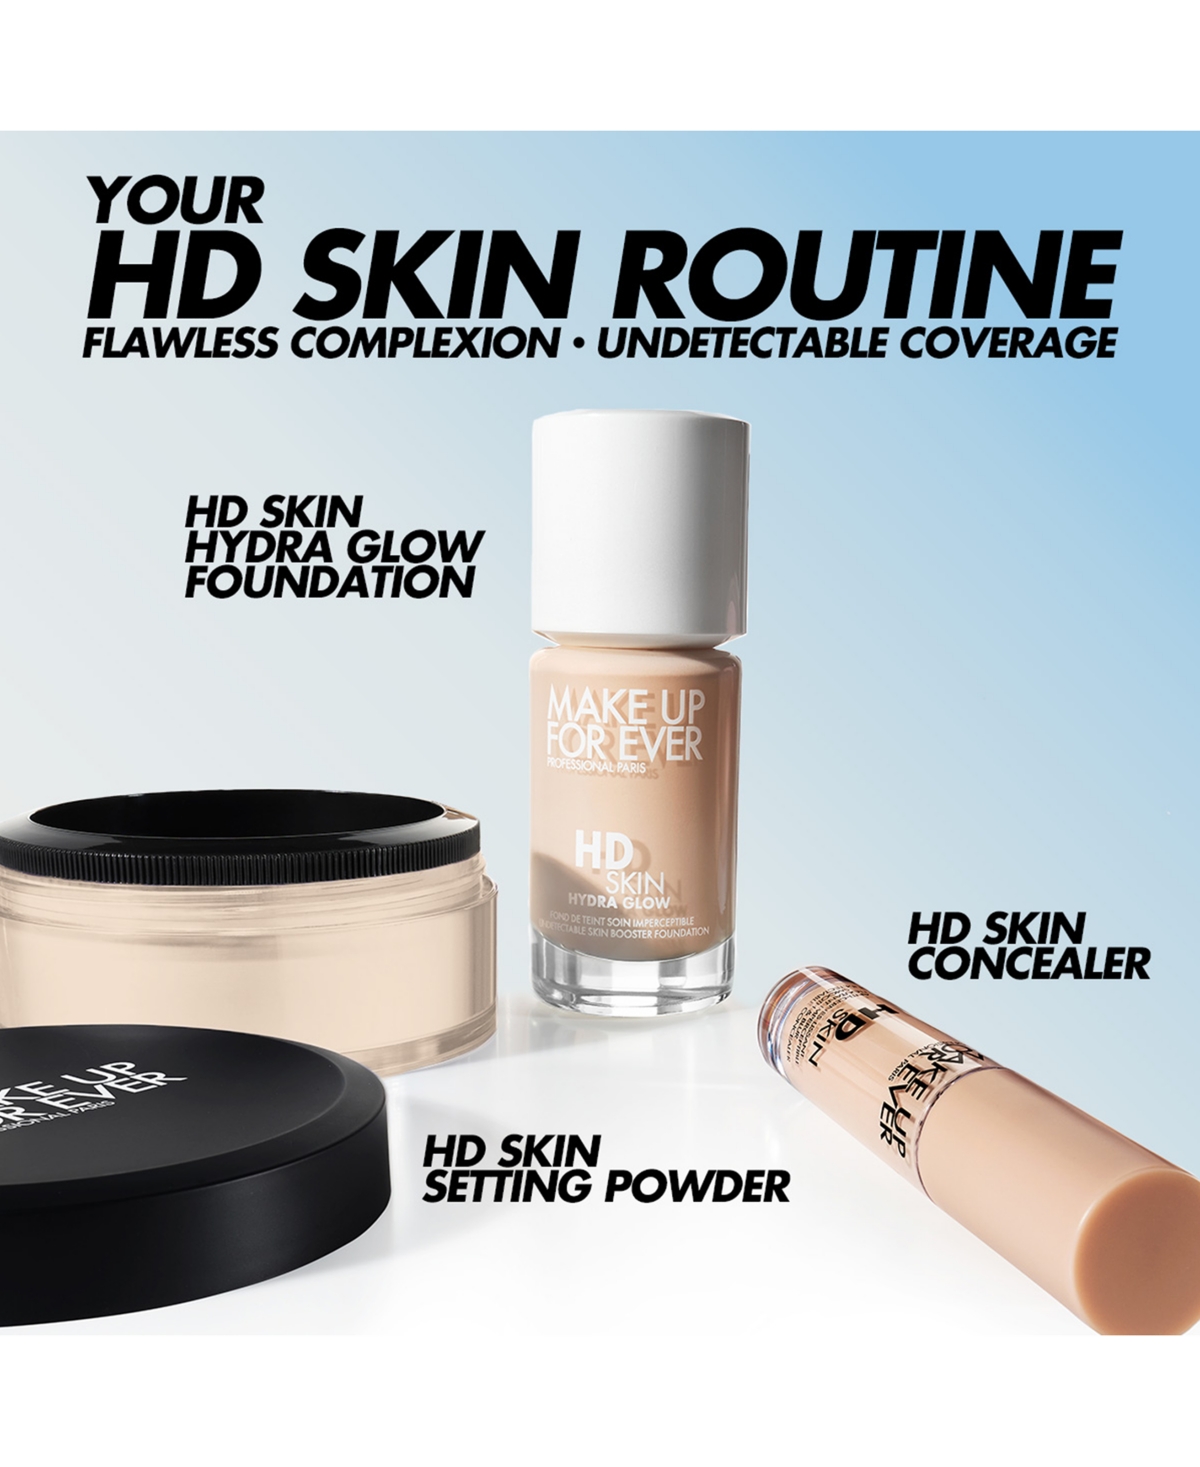 Shop Make Up For Ever Hd Skin Hydra Glow Skincare Foundation With Hyaluronic Acid In Y - Warm Pralineâ - For Medium To Tan S